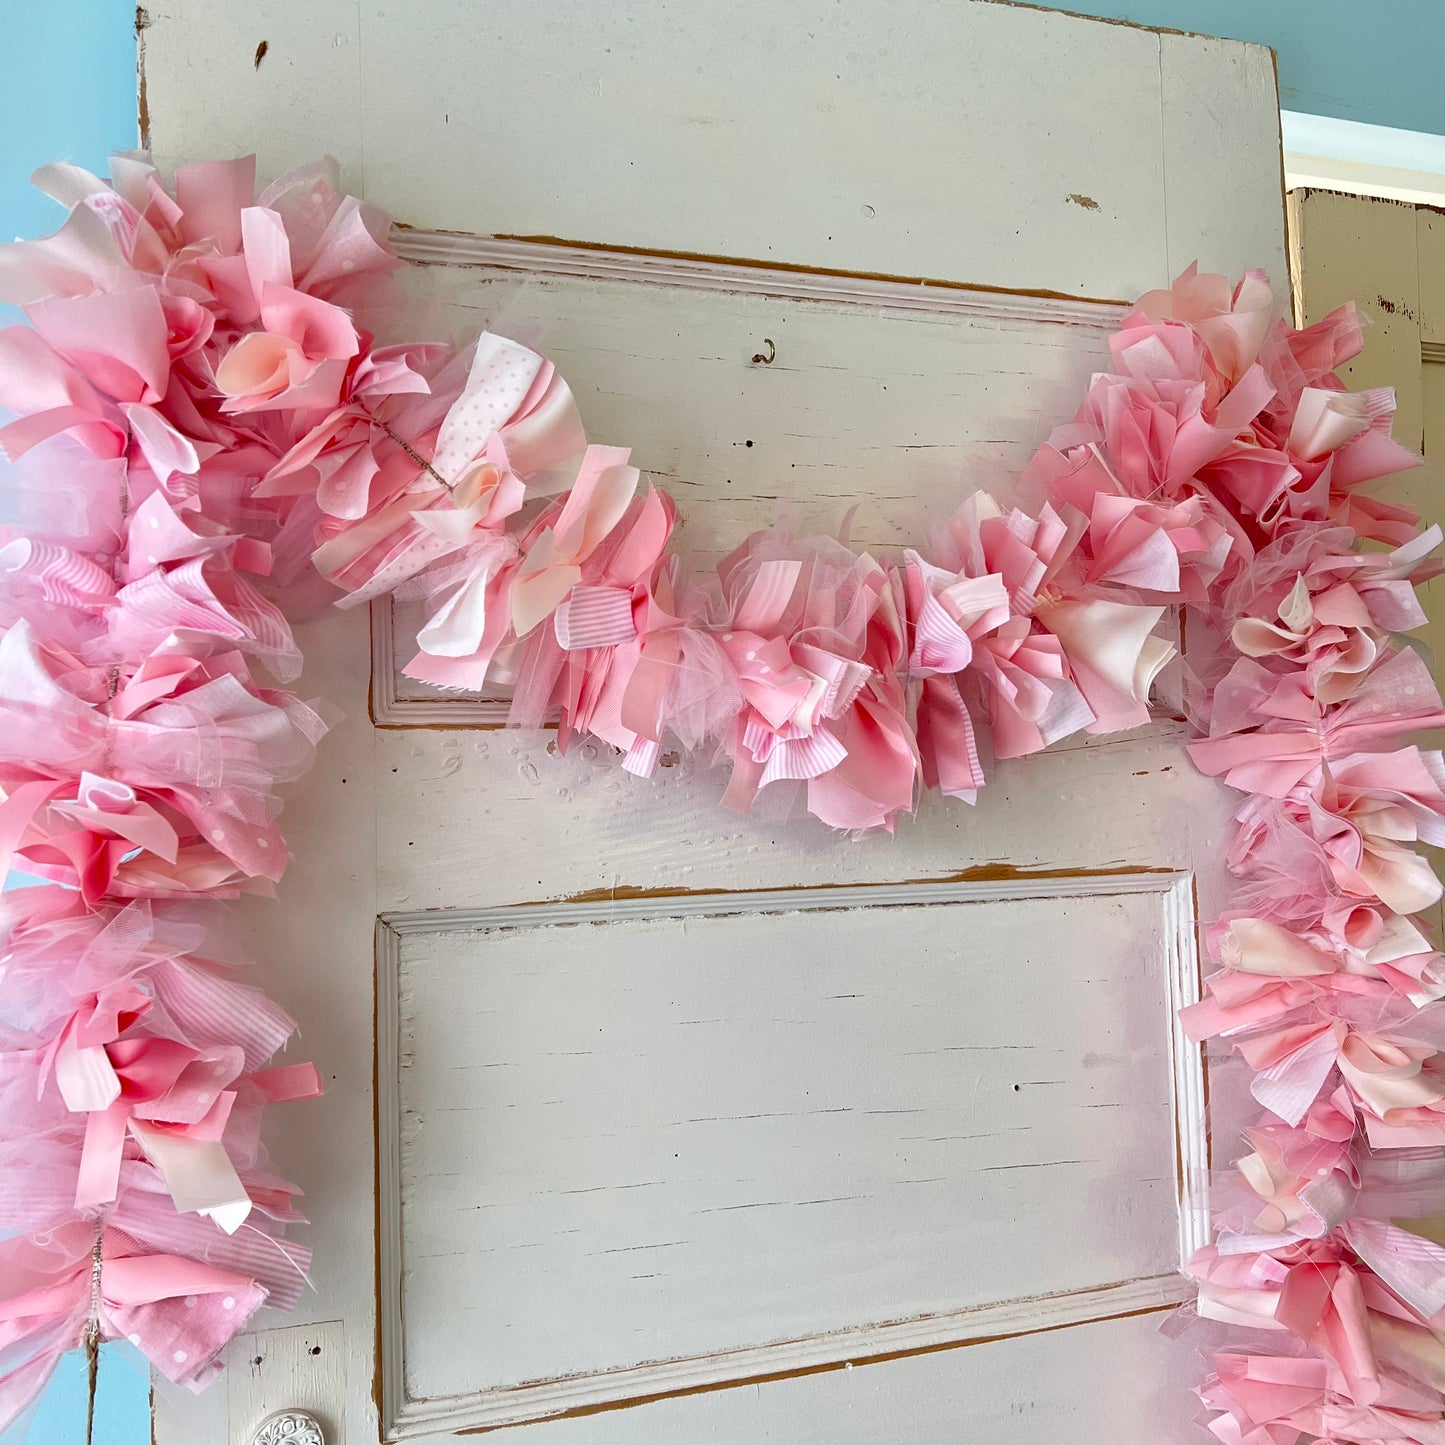 Baby Girl Shower Decoration Pink fabric Garland Banner.  Handmade 6-10 Feet Unique Party Backdrop.  Made to Order